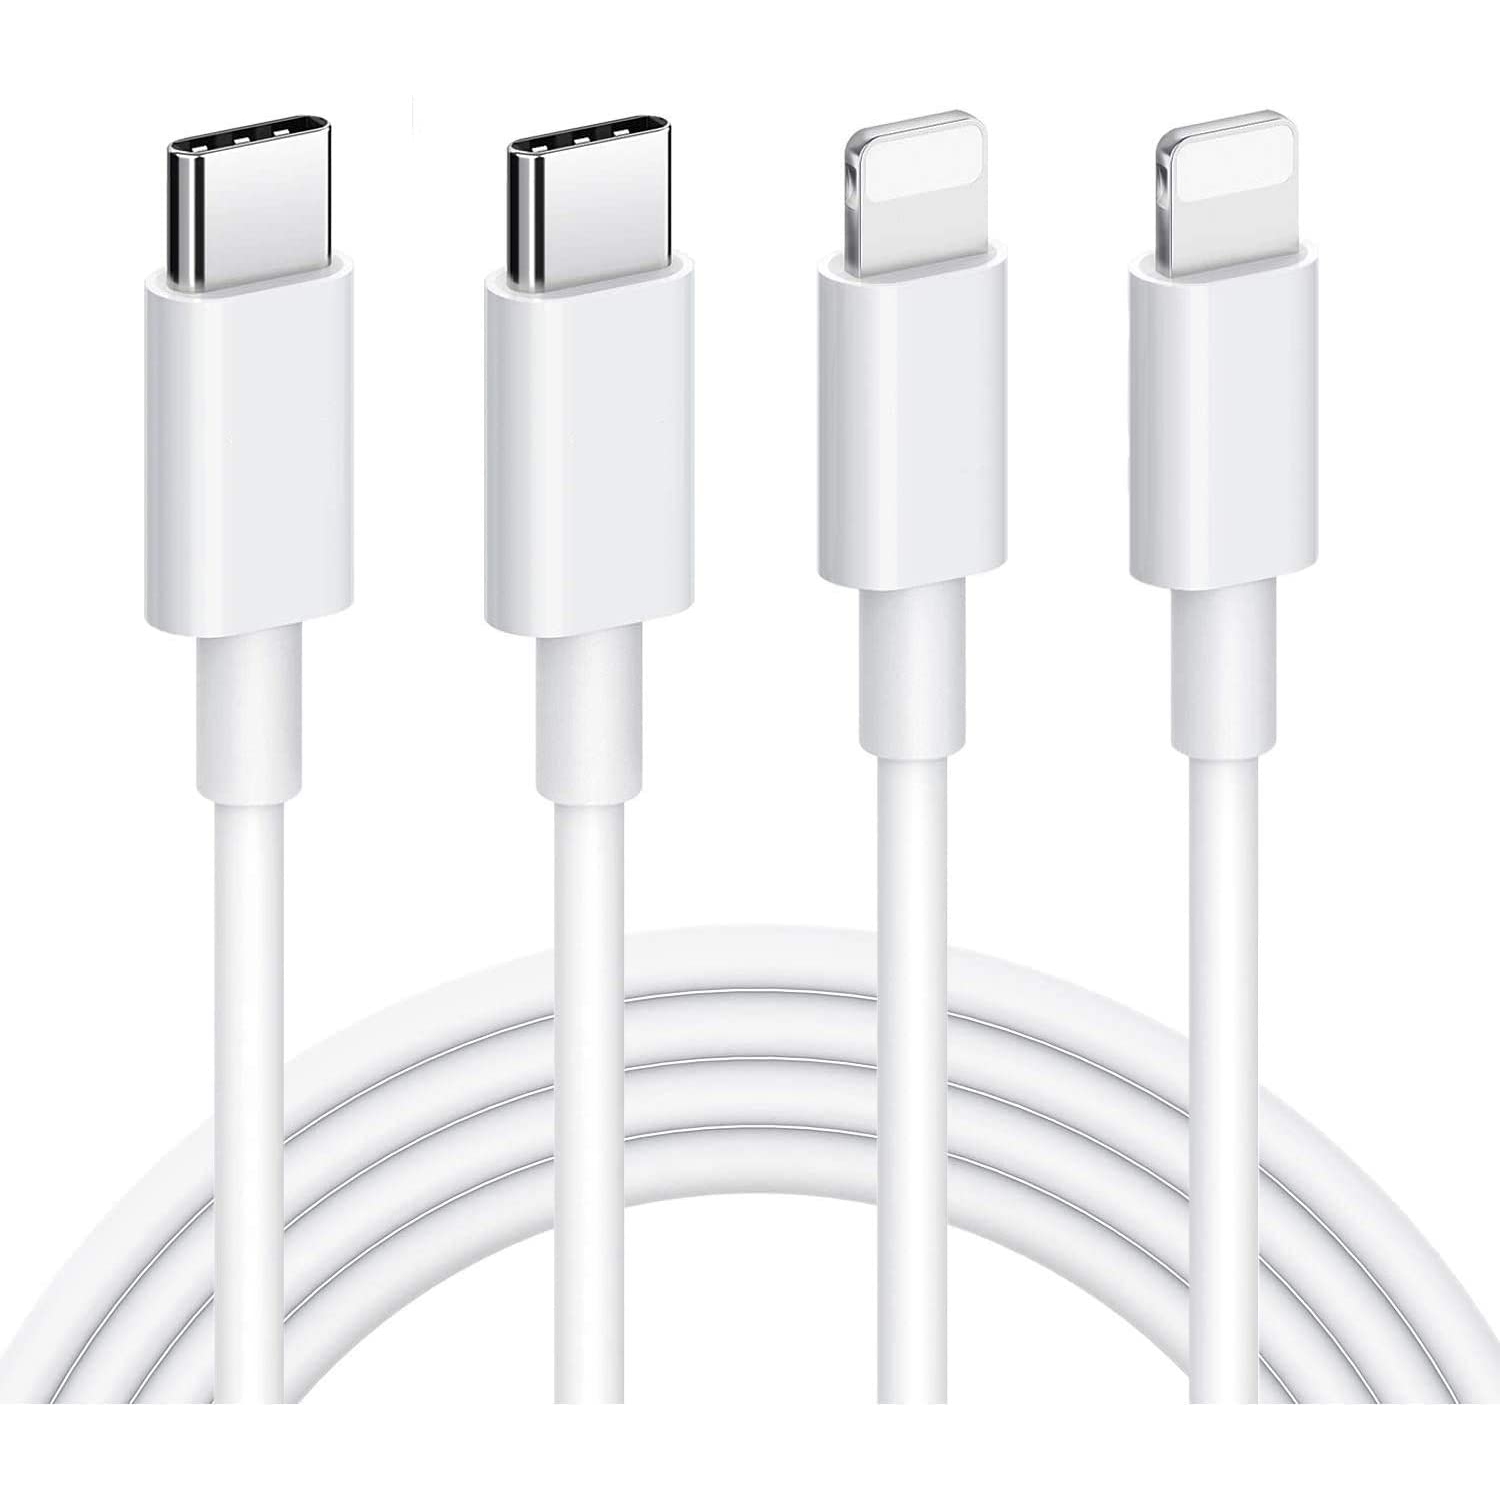 Cableshark USB C to Lightning Cable, iPhone Cable 10Pack 3ft Type C to Lightning Cable for Charging and Syncing Compatible with iphone11/11PRO/XS/Max/XR/X/8/8Plus/7/7Plus/6S/Plus/SE/Ipad and More